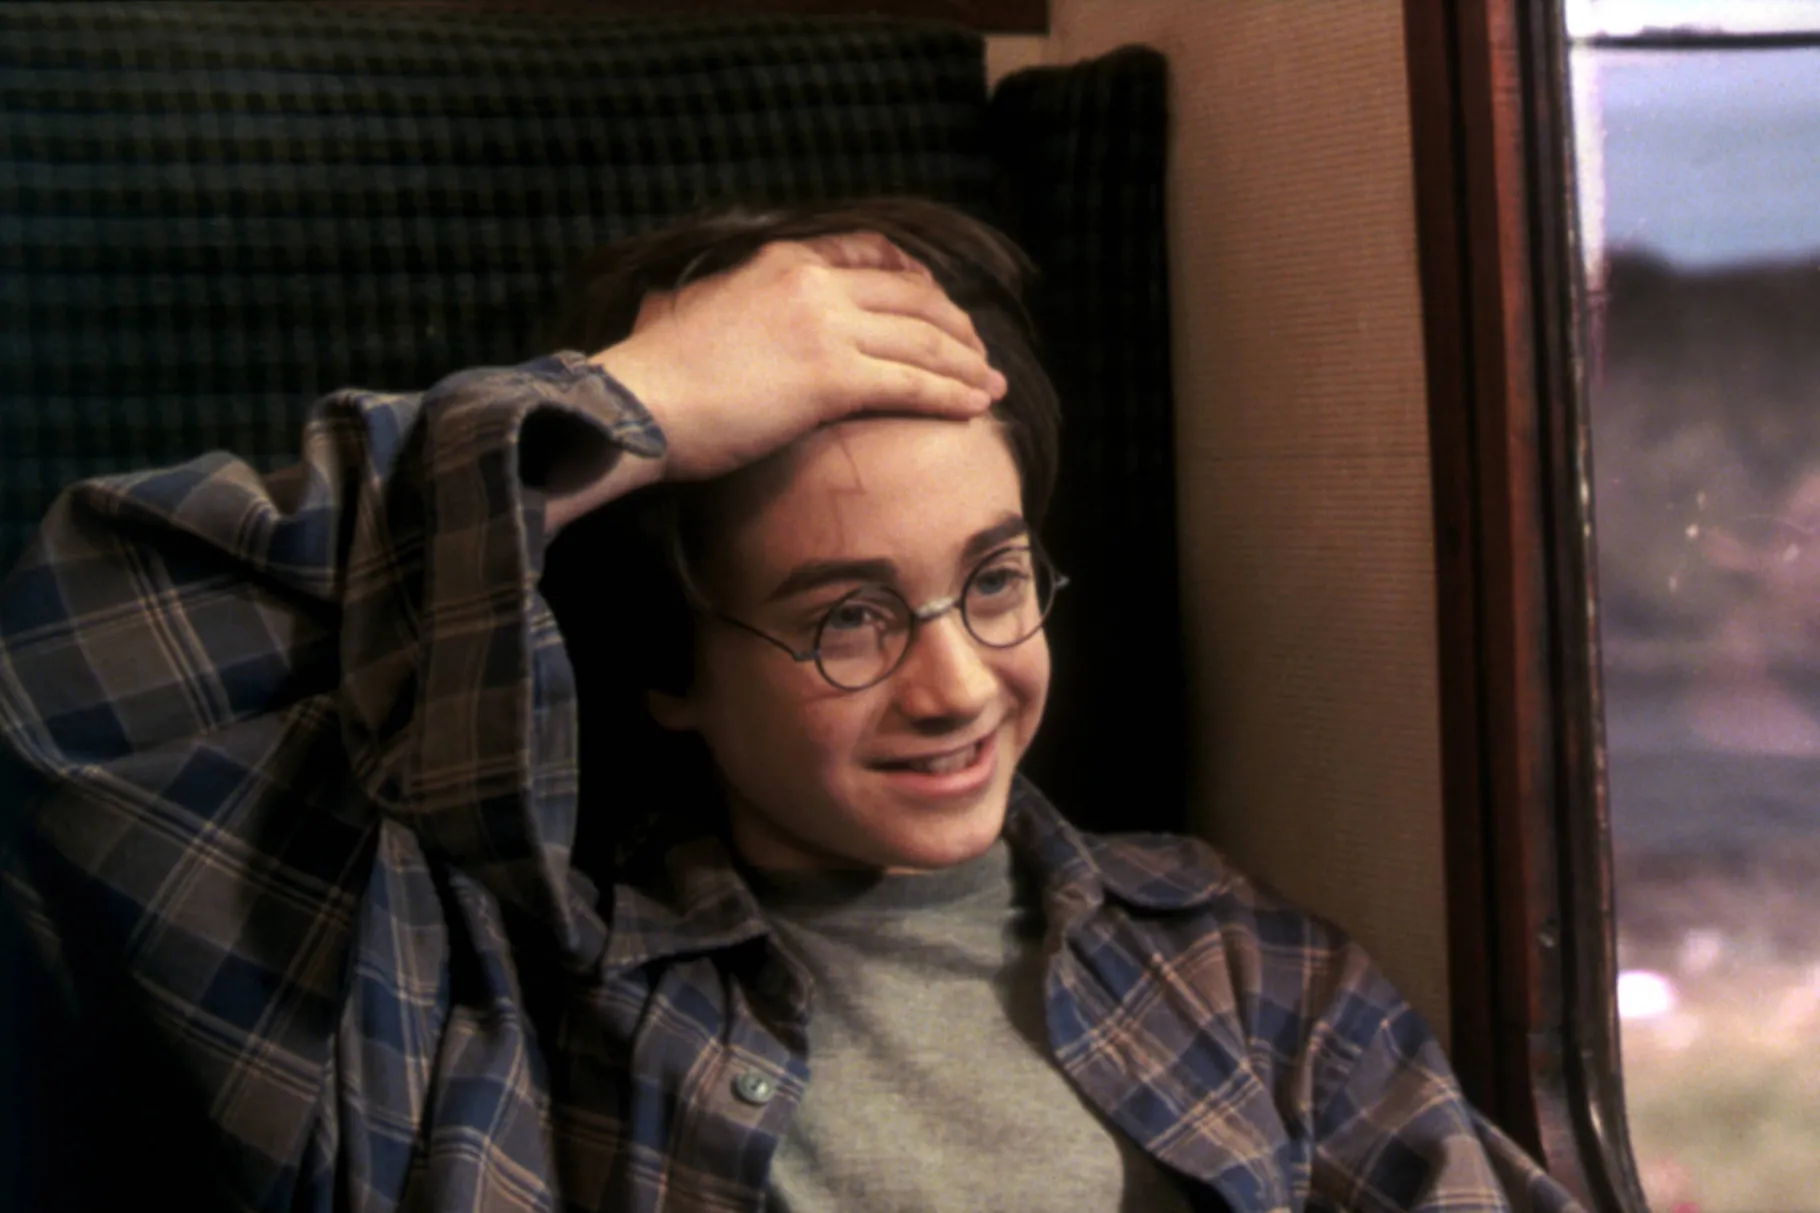 WB wants additional Harry Potter films, but what exactly does that imply?